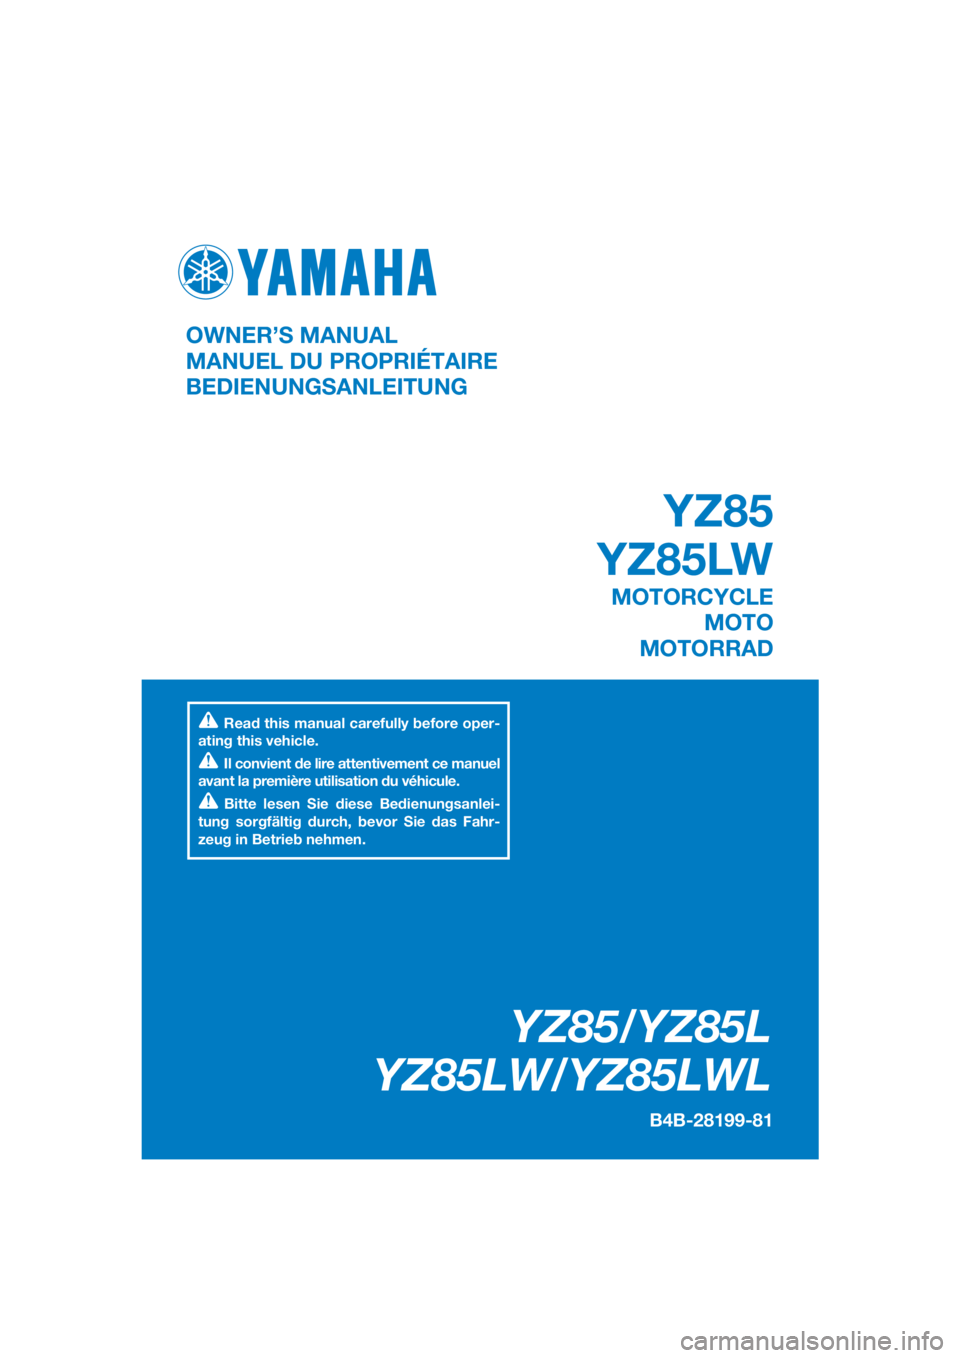 YAMAHA YZ85 2020  Owners Manual DIC183
YZ85/YZ85L
YZ85LW/YZ85LWL
B4B-28199-81
OWNER’S MANUAL
MANUEL DU PROPRIÉTAIRE
BEDIENUNGSANLEITUNG
Read this manual carefully before oper-
ating this vehicle.
Il convient de lire attentivement